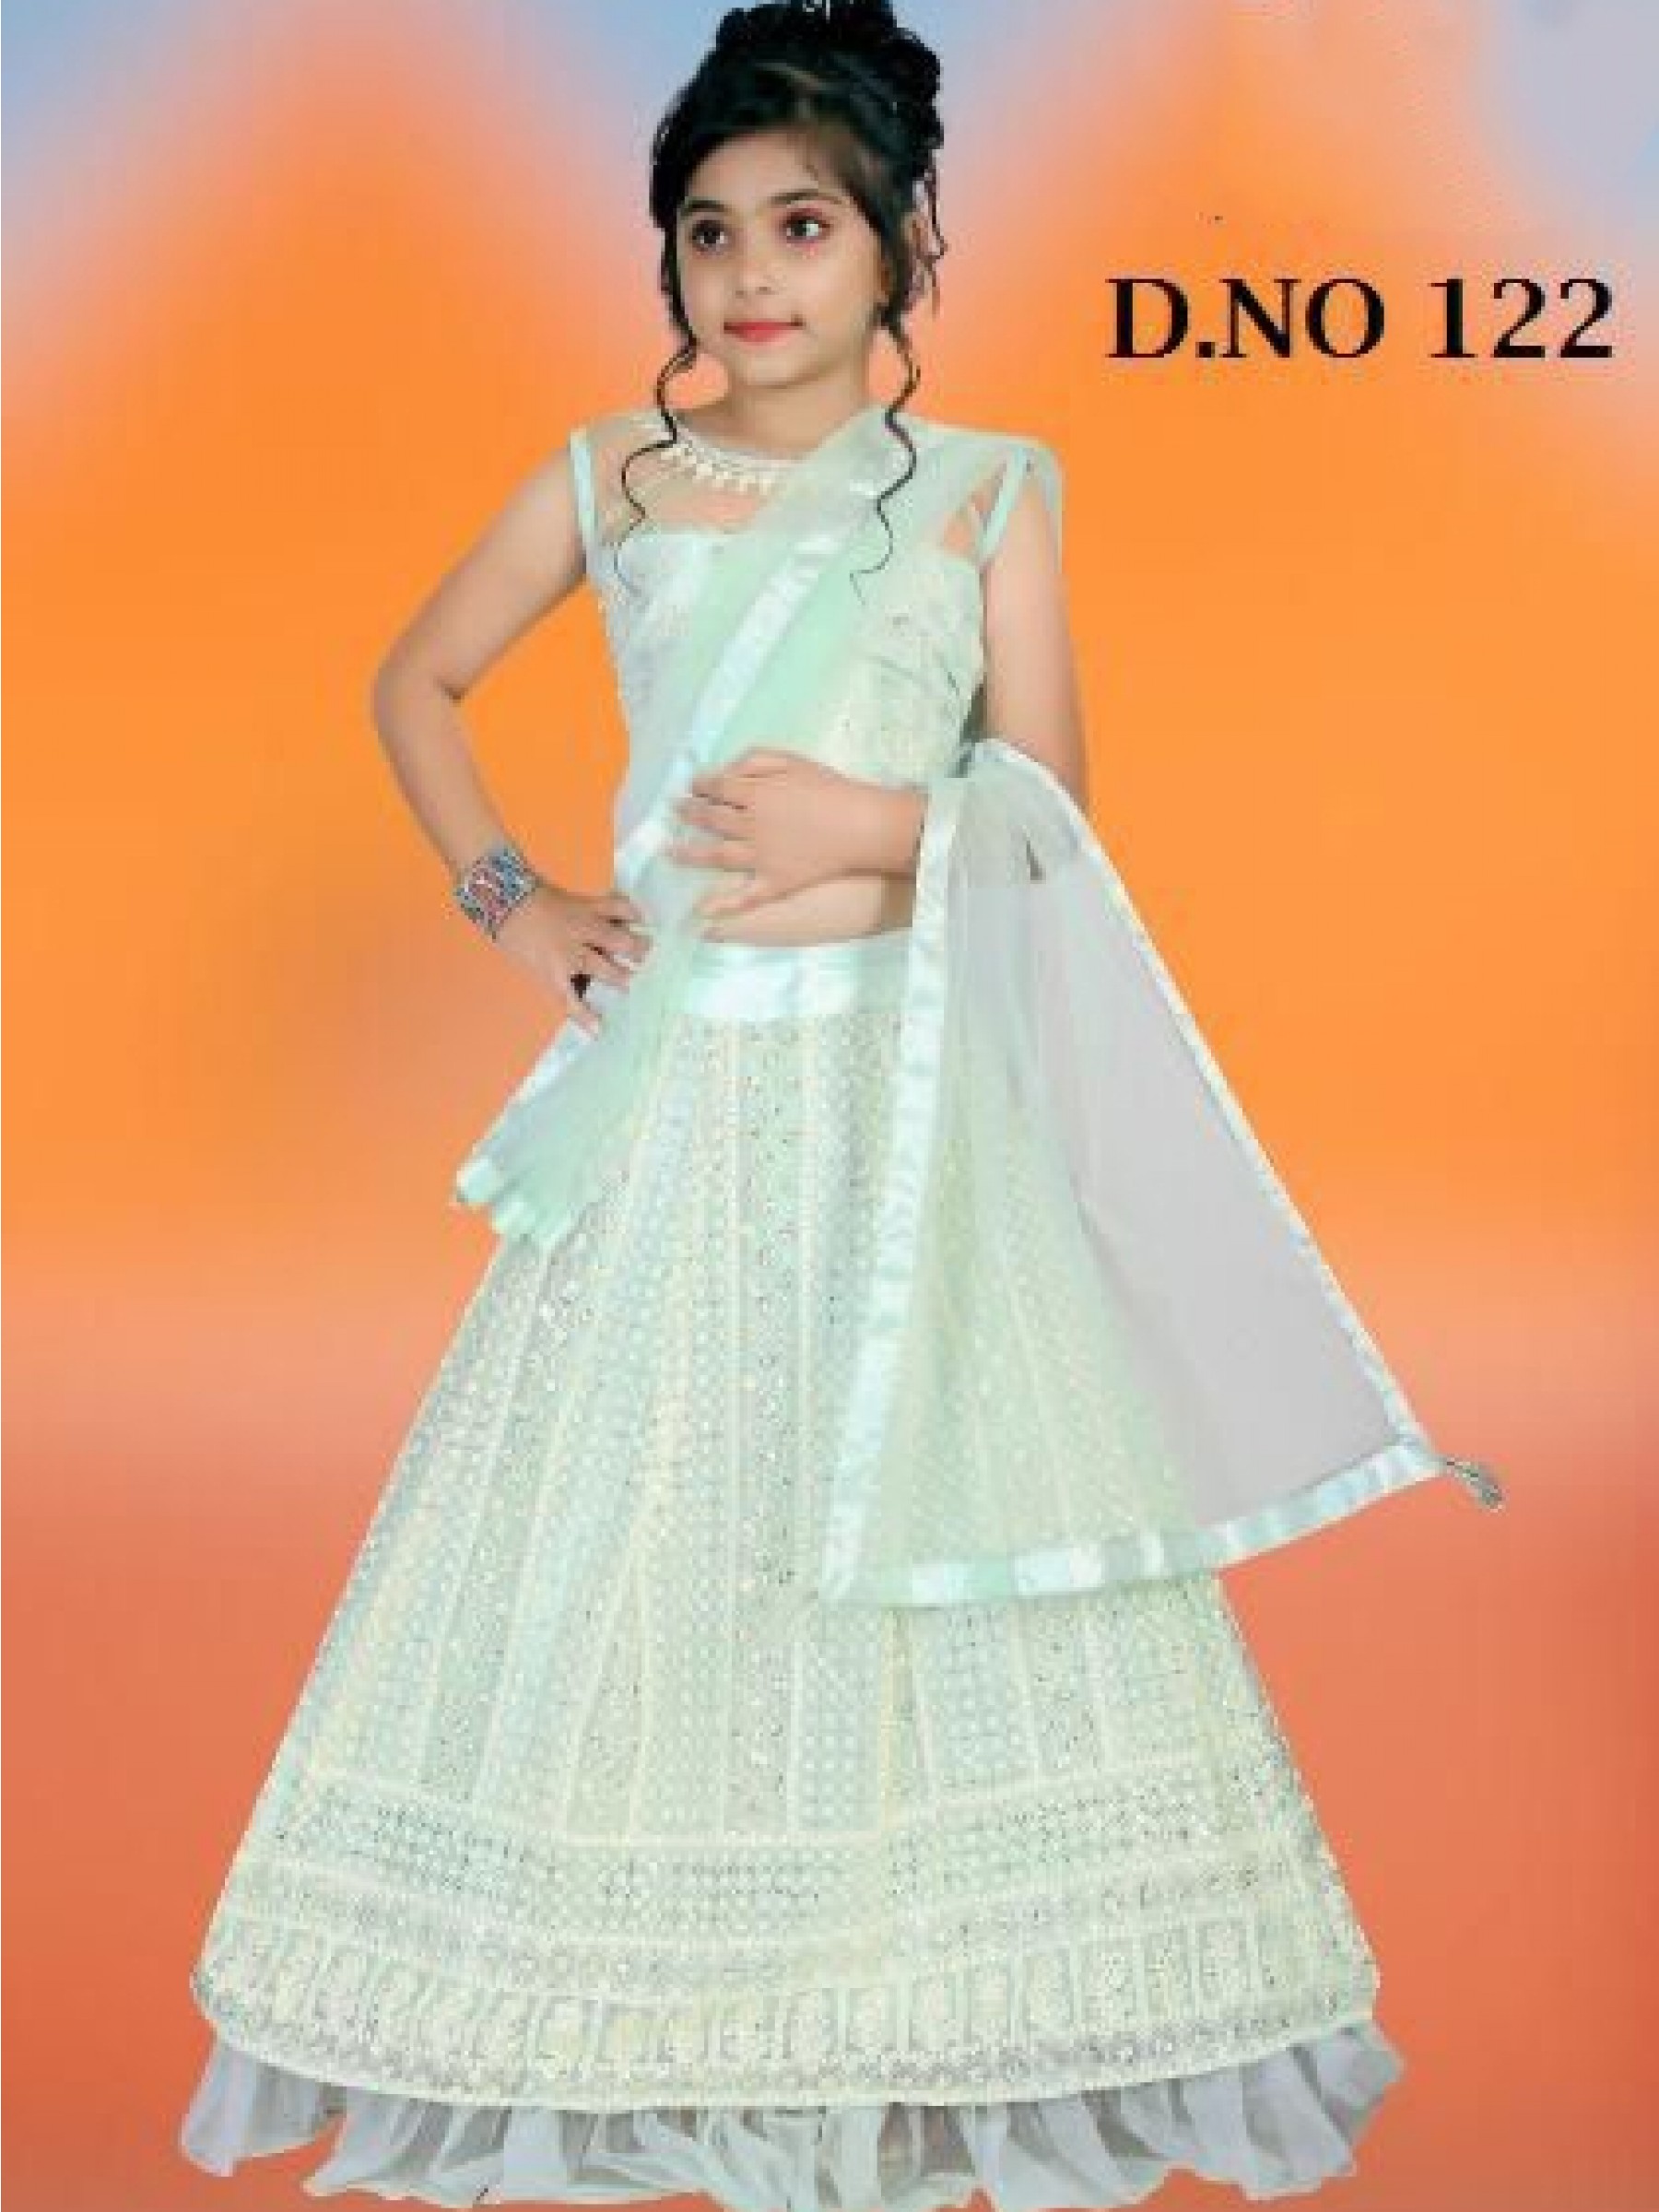 Soft Premium Net Party Wear Kids Lehenga In Sea Green With Embroidery Work 